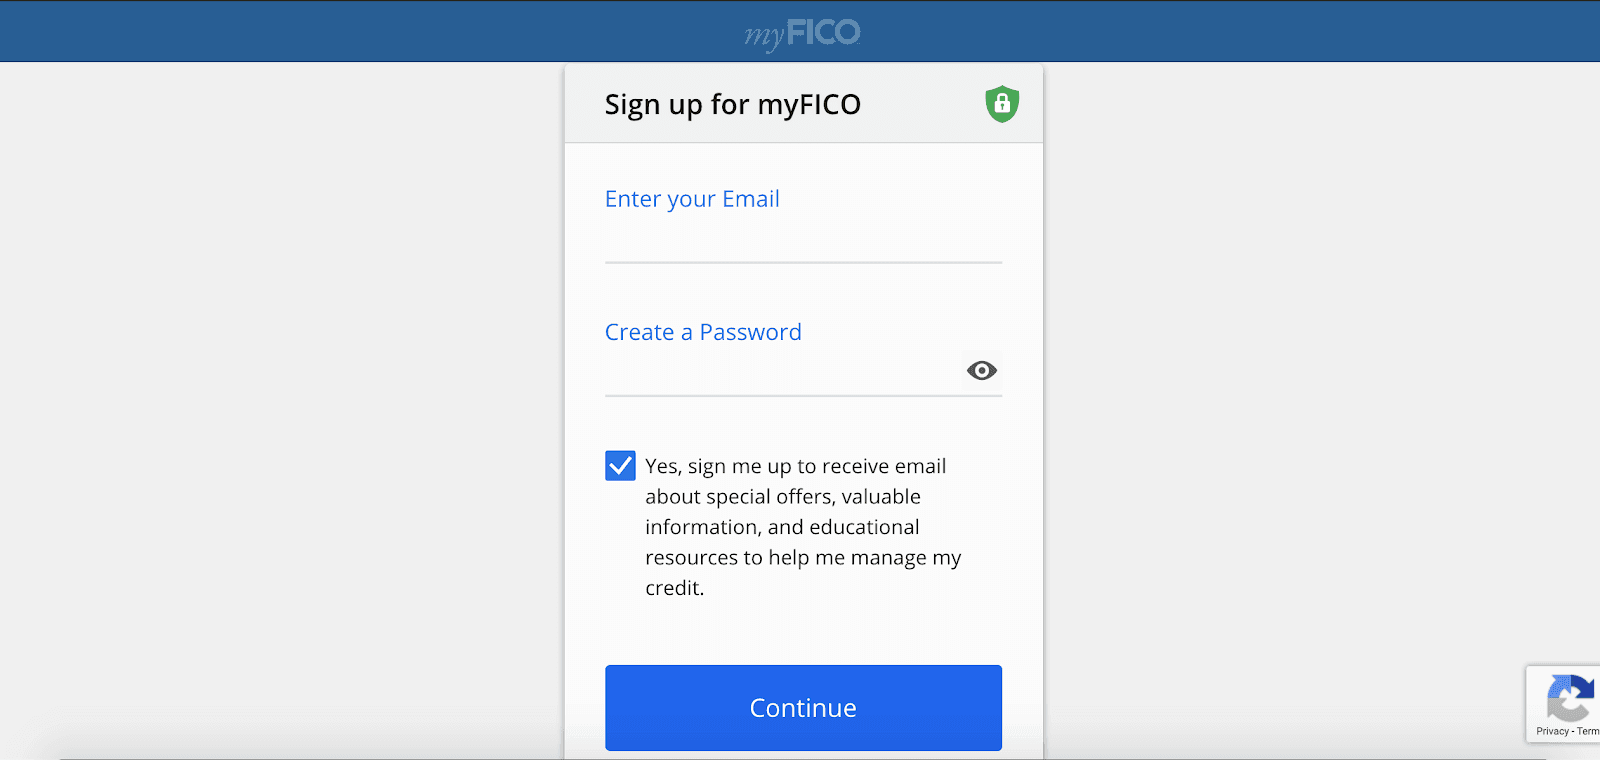 myFICO Review: My Experience Using myFICO - Sign up for myFICO